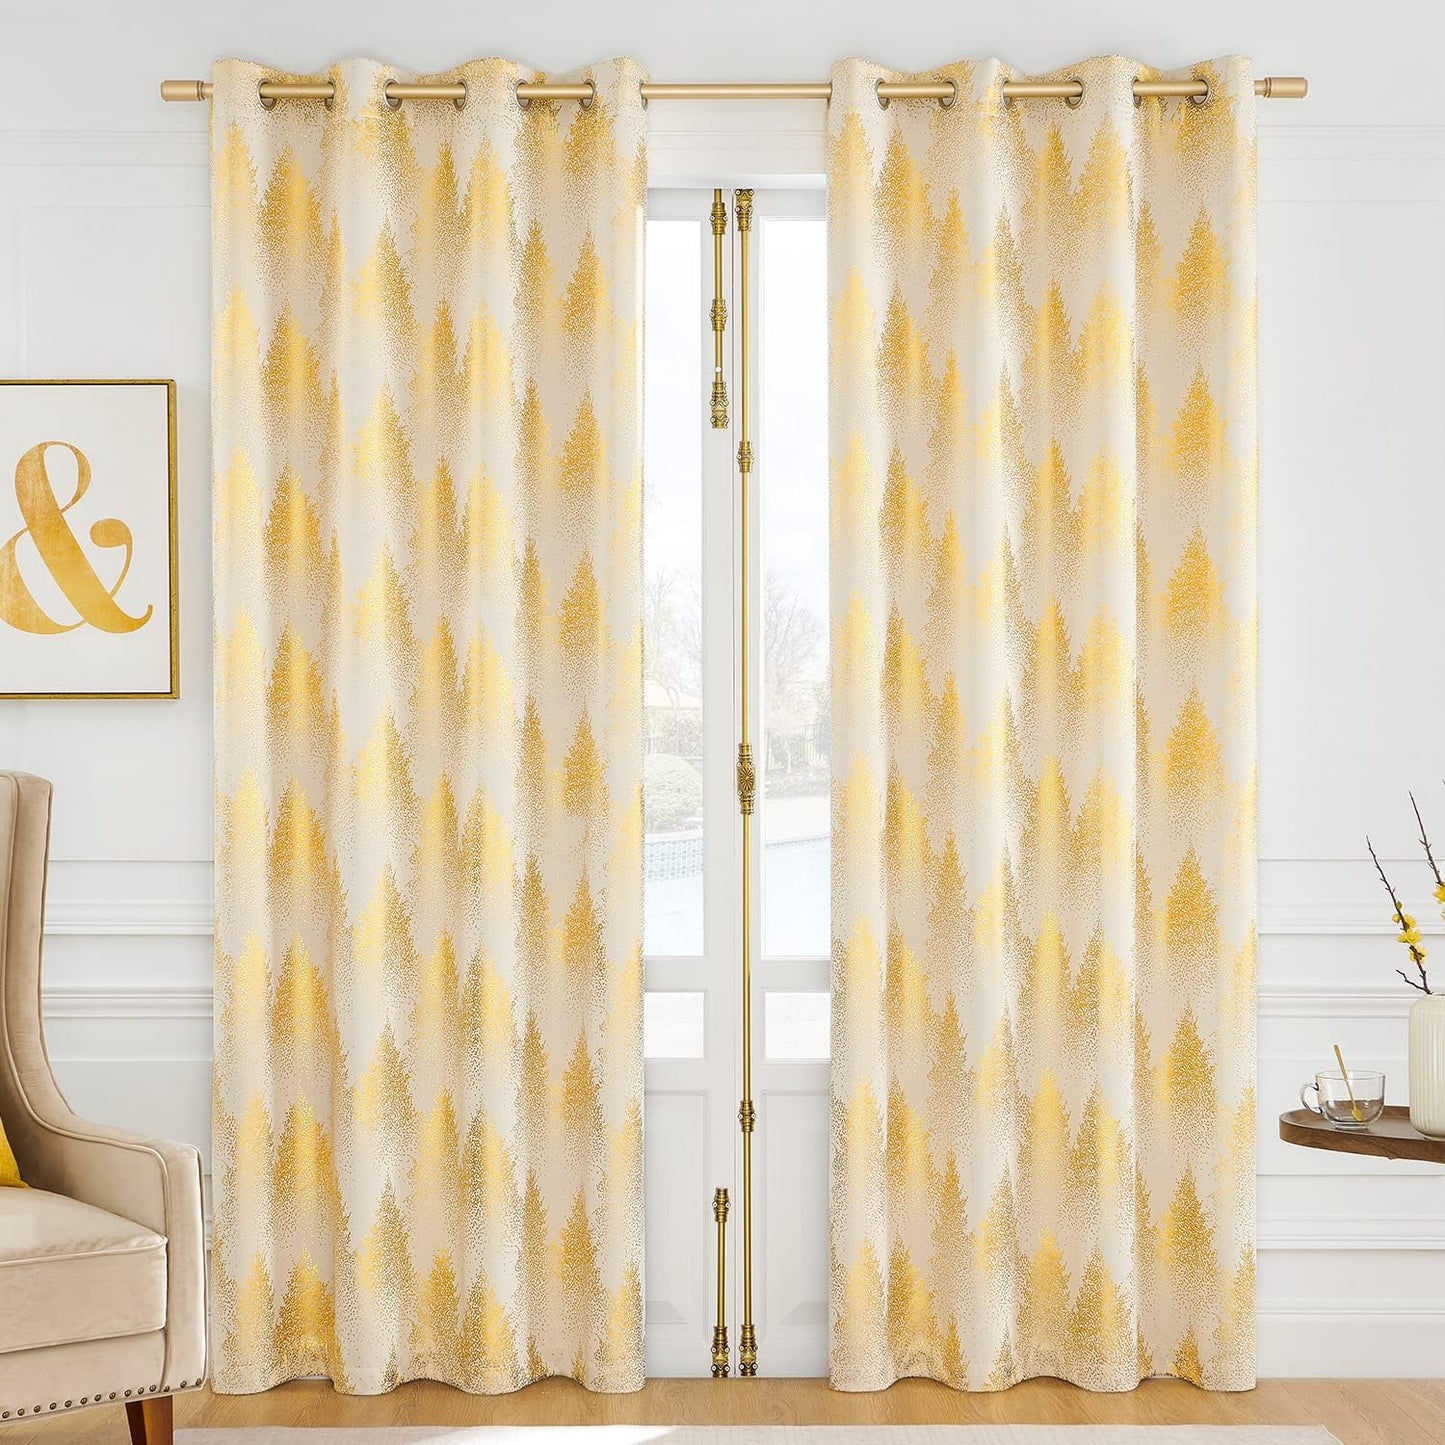 FMFUNCTEX Metallic Tree Blackout Curtains Bedroom Grey 84-Inch Living-Room Branch Print Curtain Panels Forest Triple Weave Thermal Insulated Drapes for Windows Dorm Hotel Grommet Top, 2Panels  Fmfunctex Forest: Gold Ivory 50"W X 84"L 2Pcs 